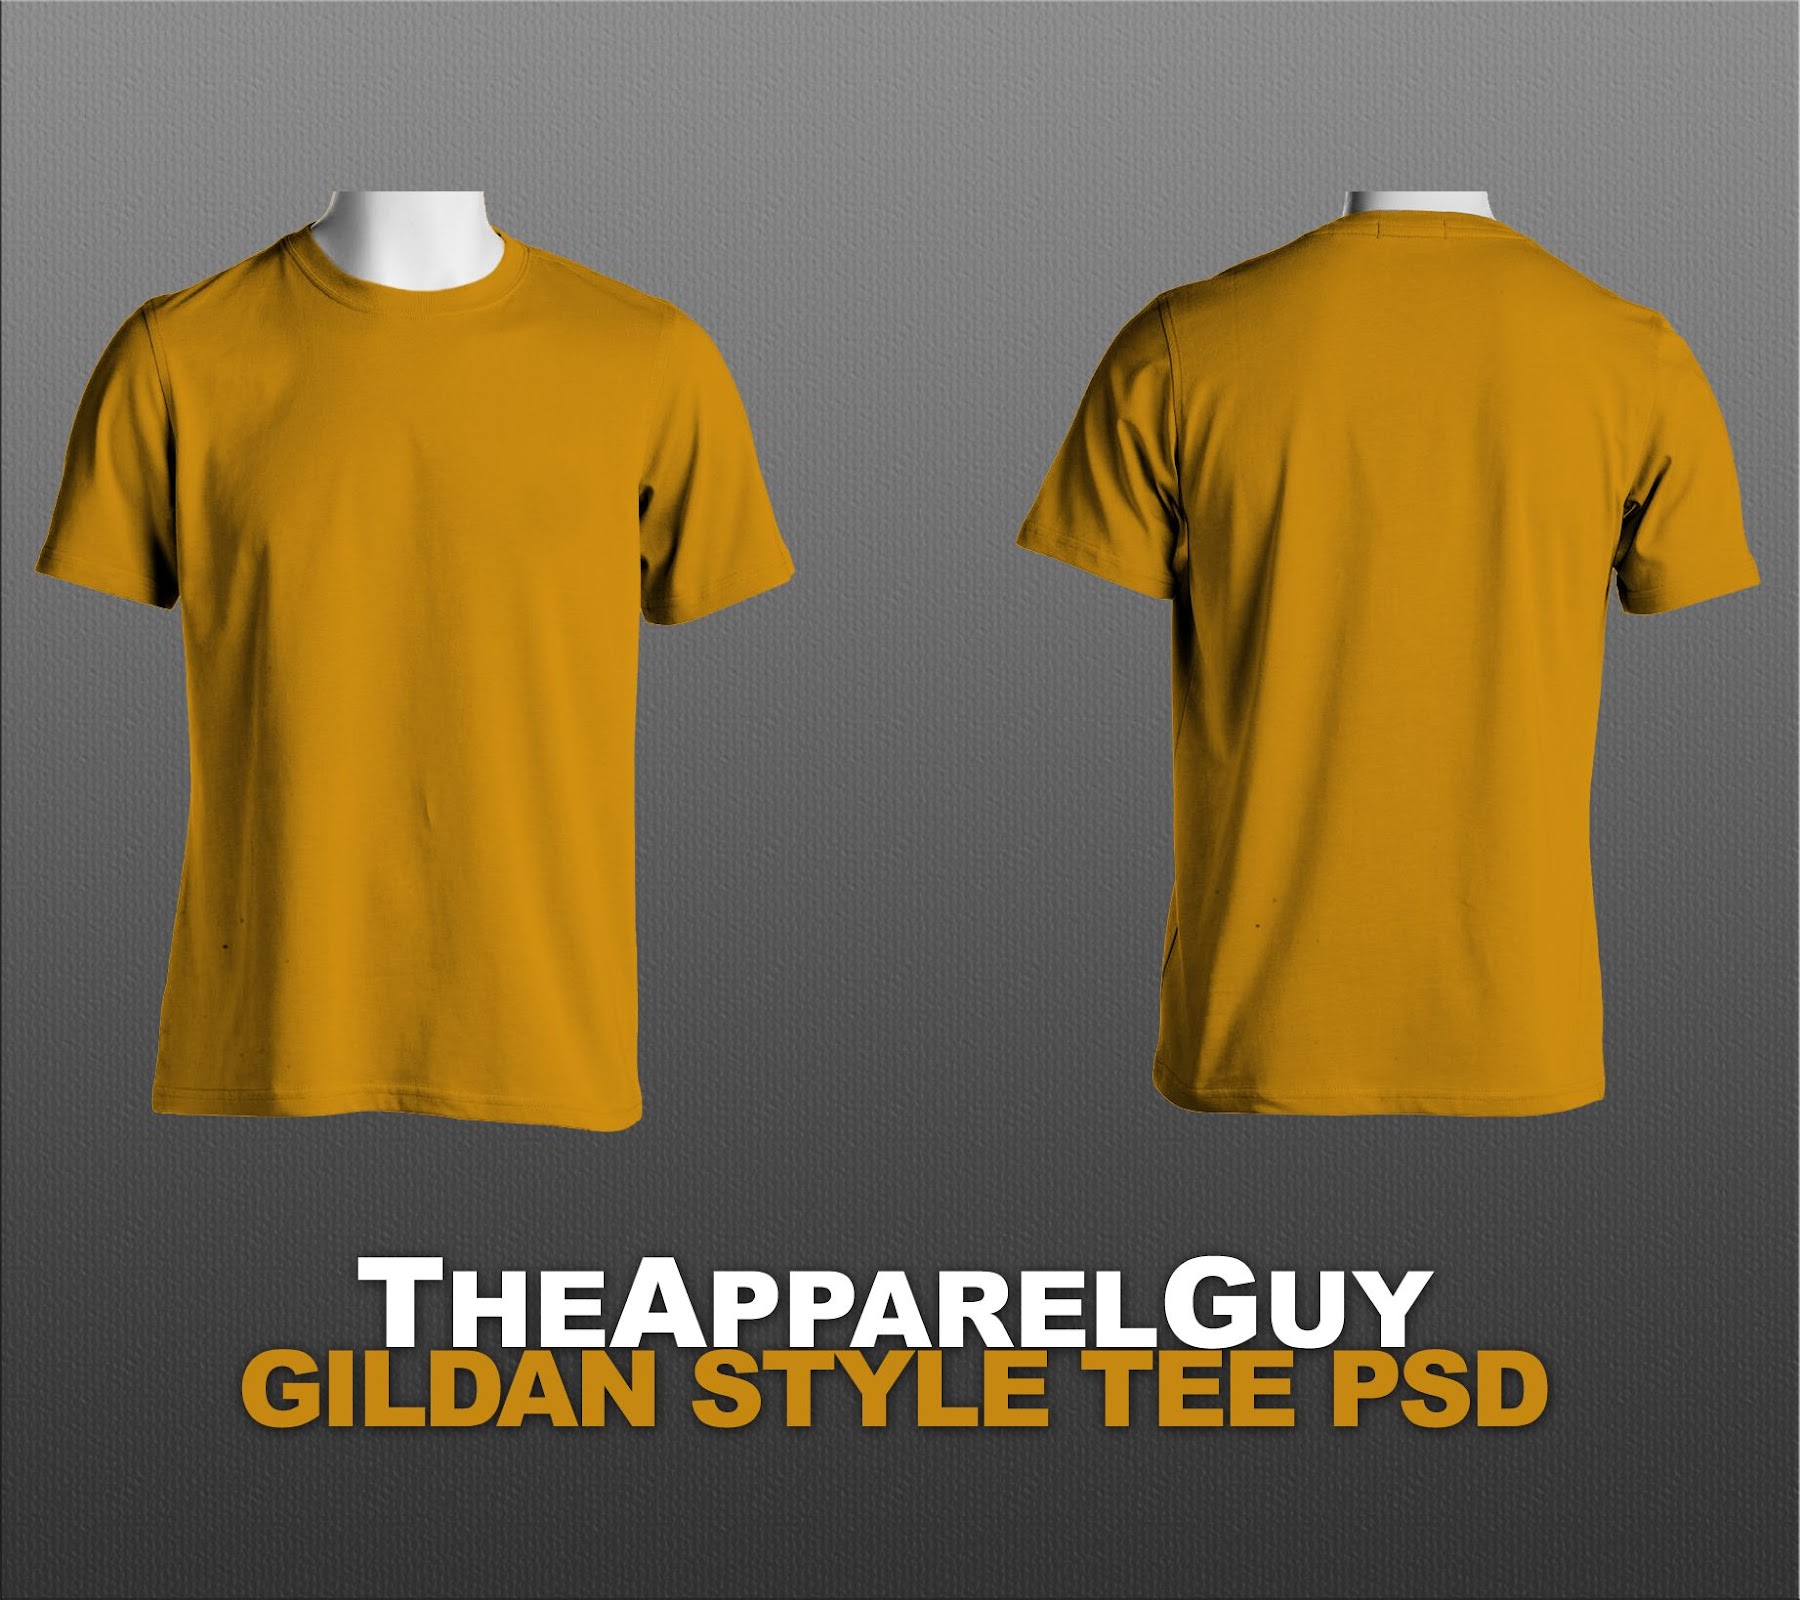 T-Shirt Mockup Front And Back Template